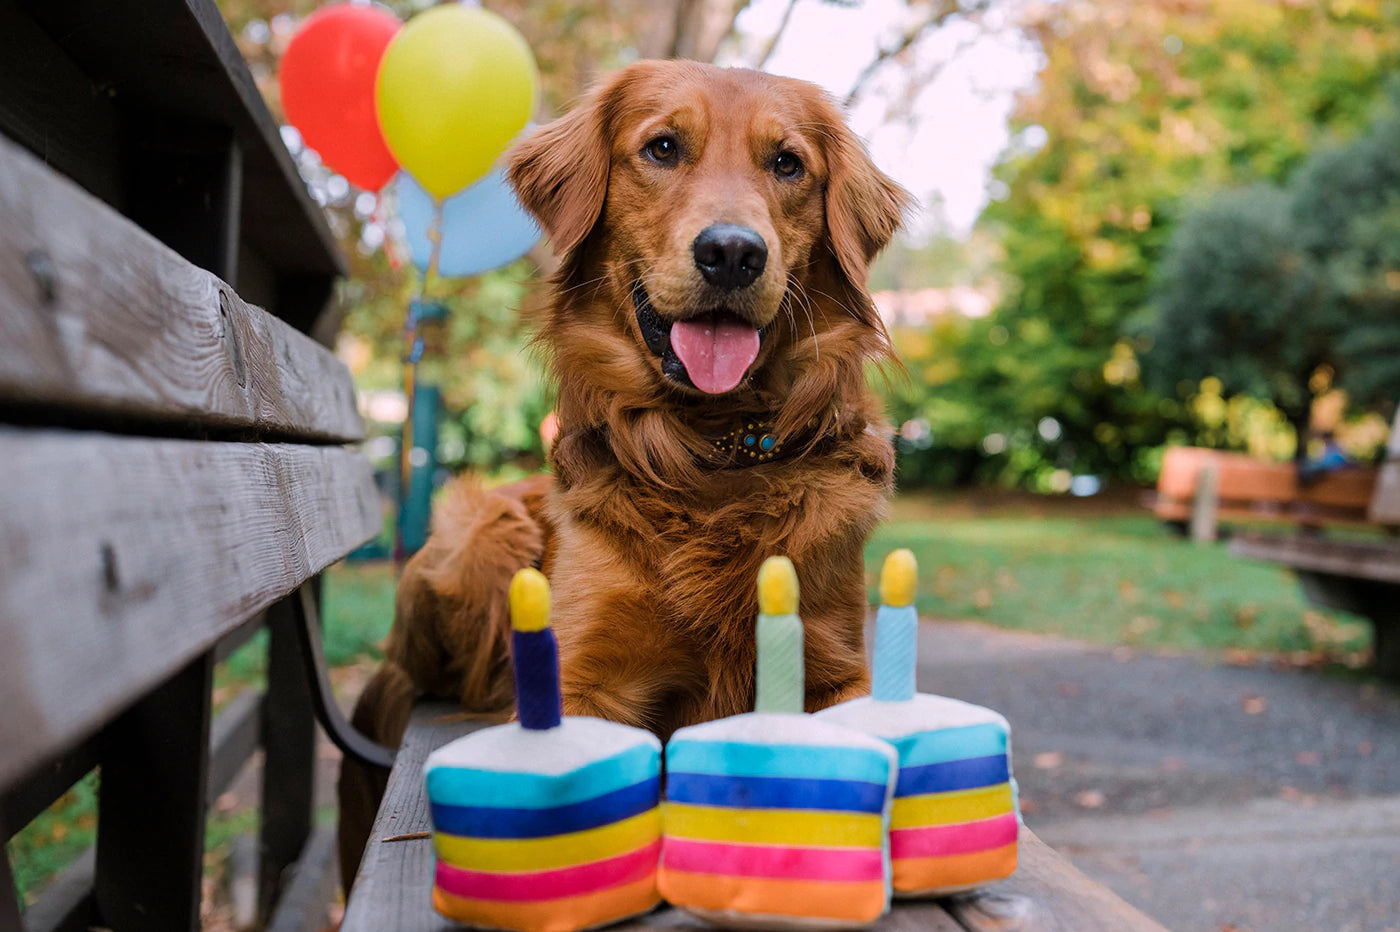 Dog Toys | Party Time {multiple styles}